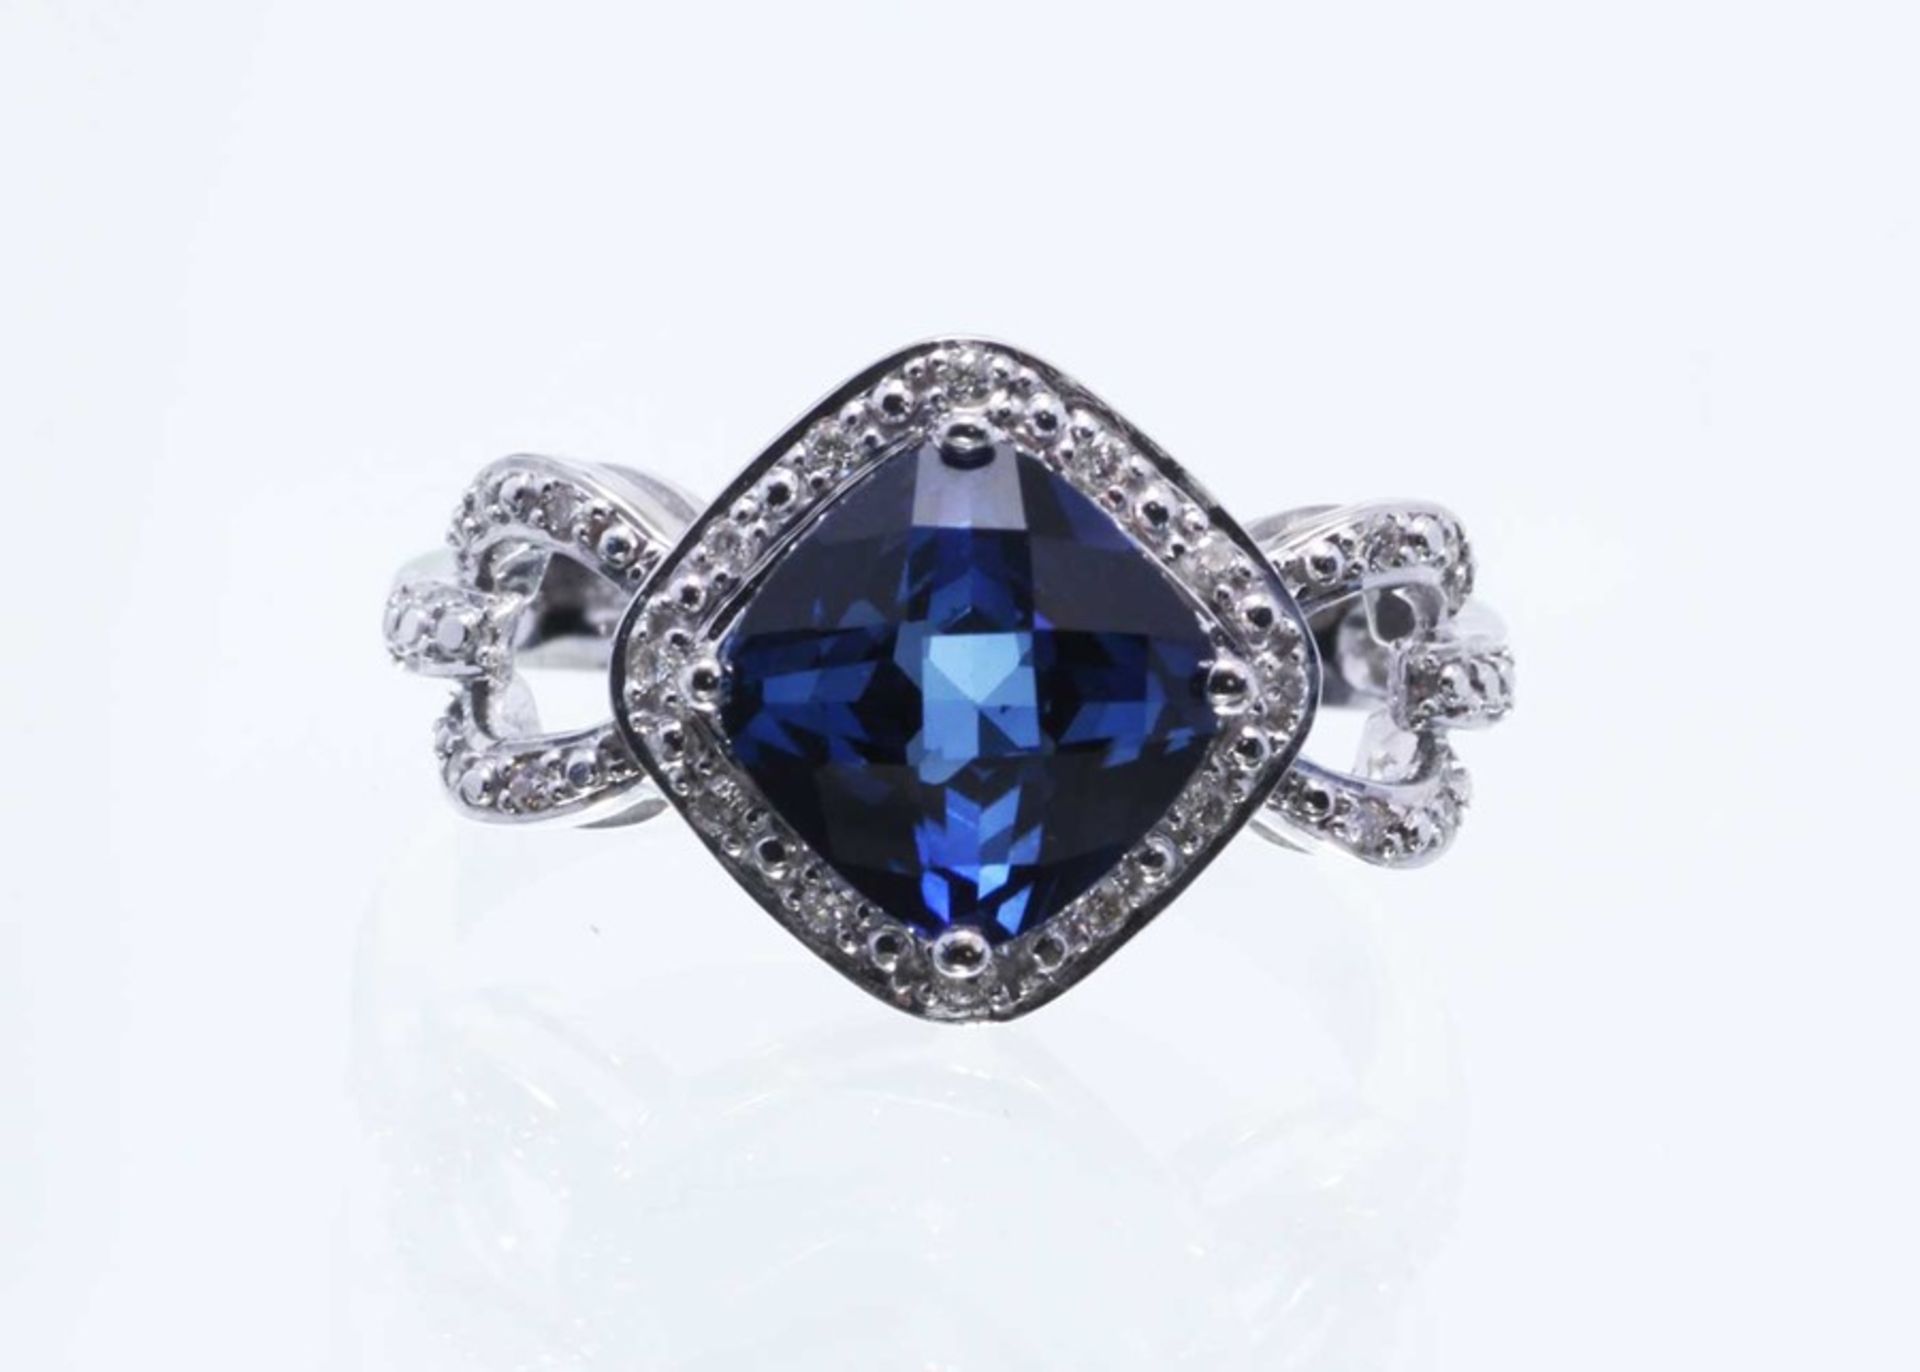 Valued by GIE £4,895.00 - 9ct White Gold Diamond Cluster Ring 0.51 Carats - 8180078, Colour-D, - Image 4 of 7